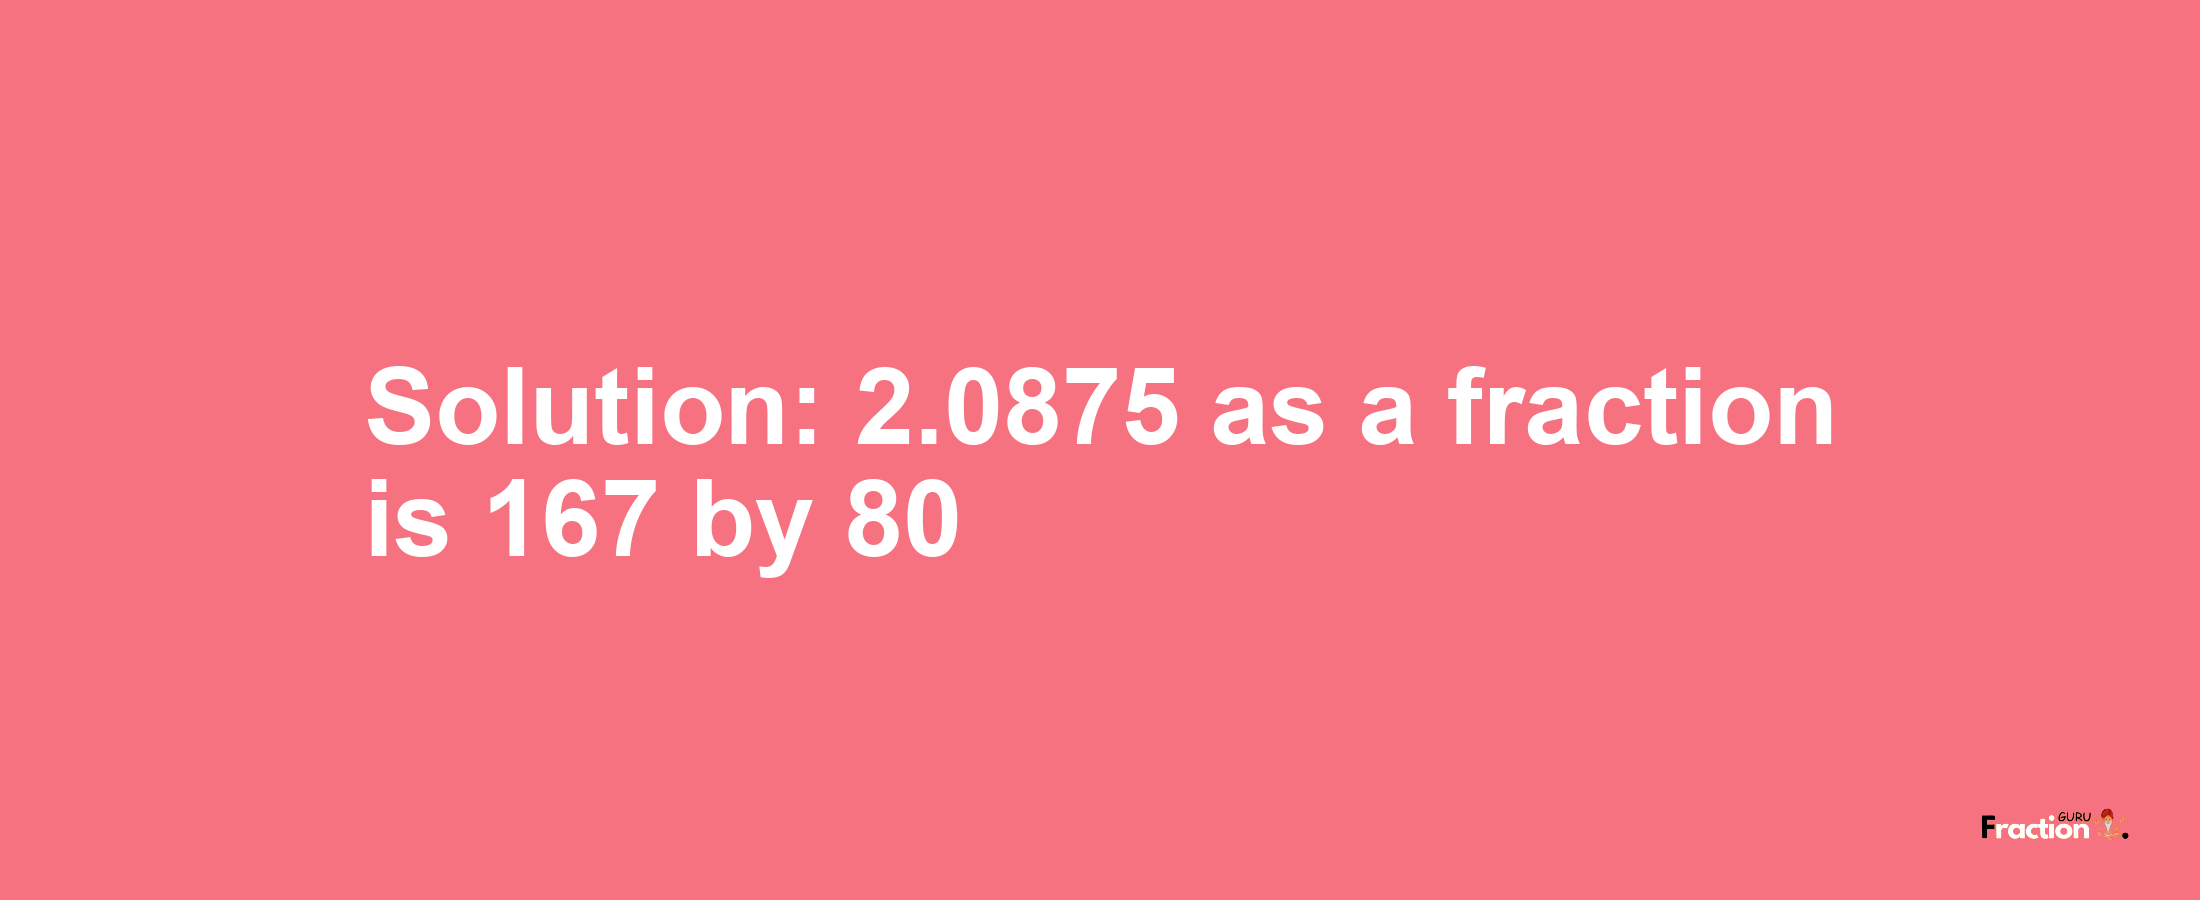 Solution:2.0875 as a fraction is 167/80